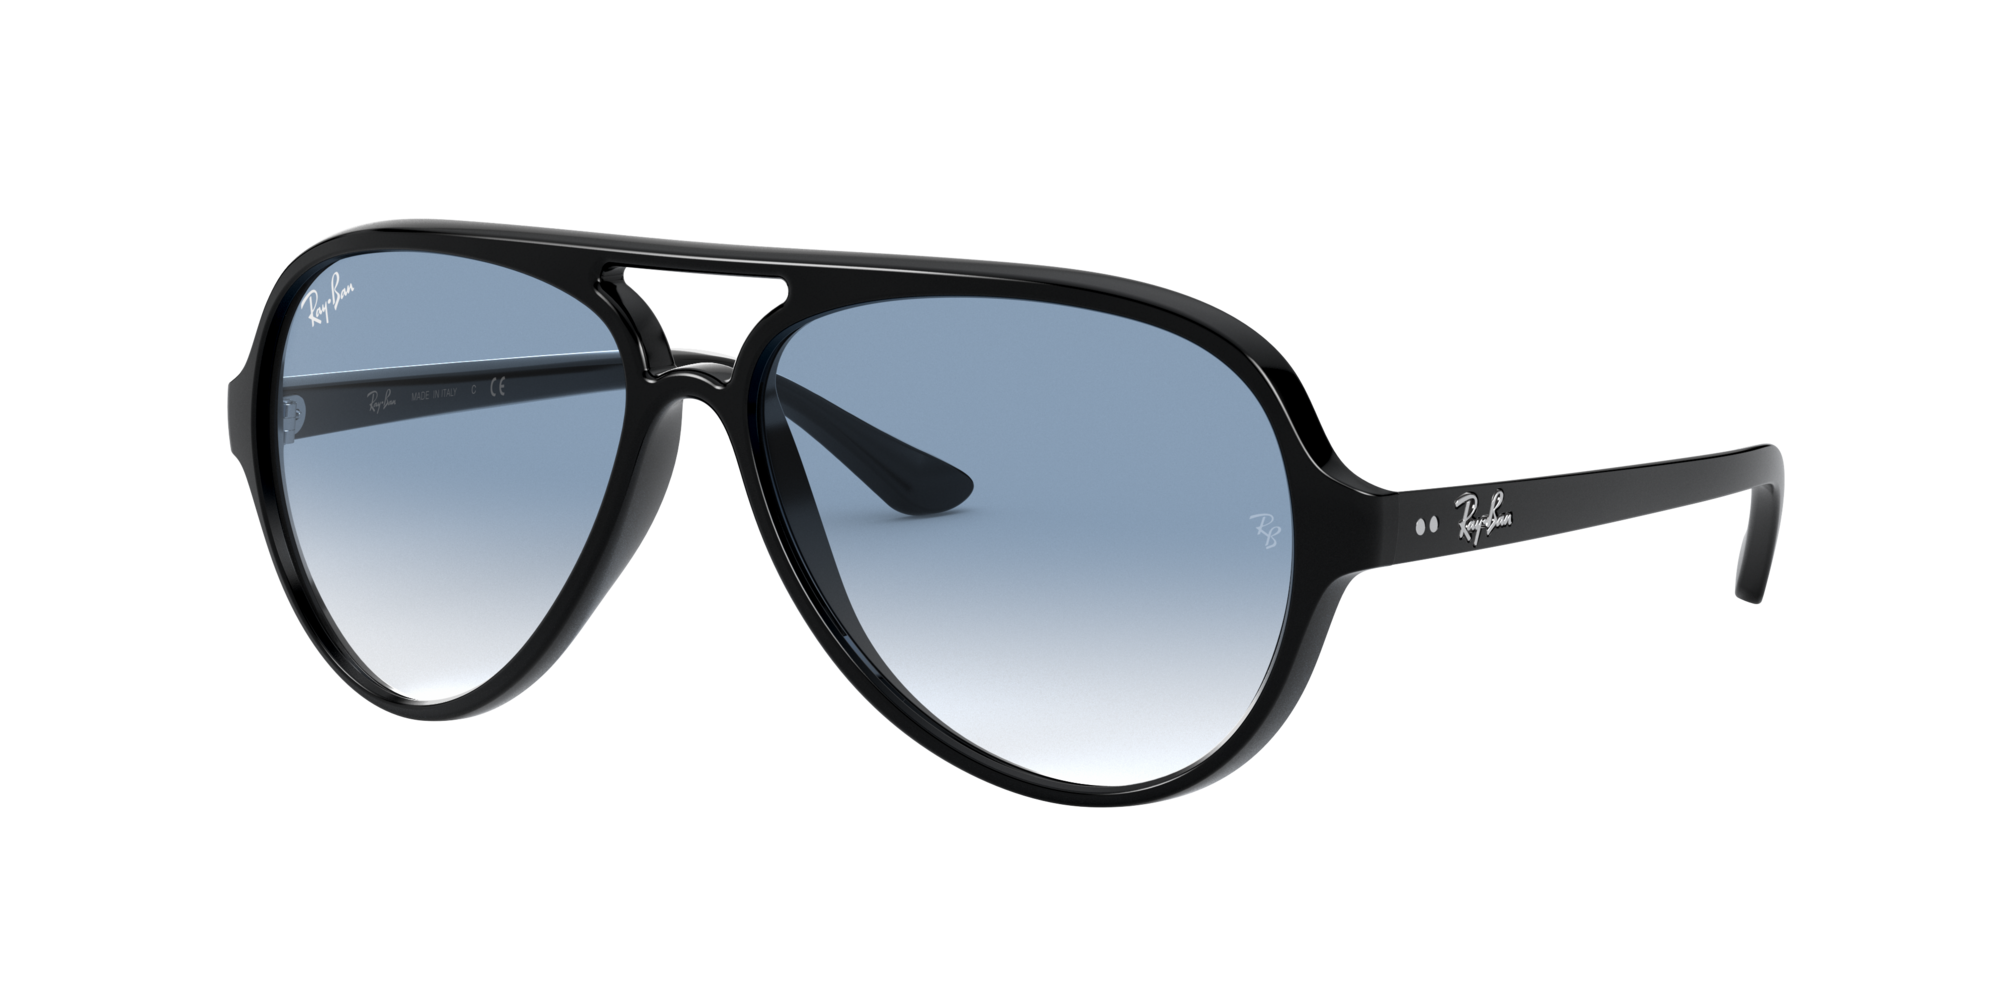 Ray-Ban RB4125 CATS 5000 CLASSIC 59 